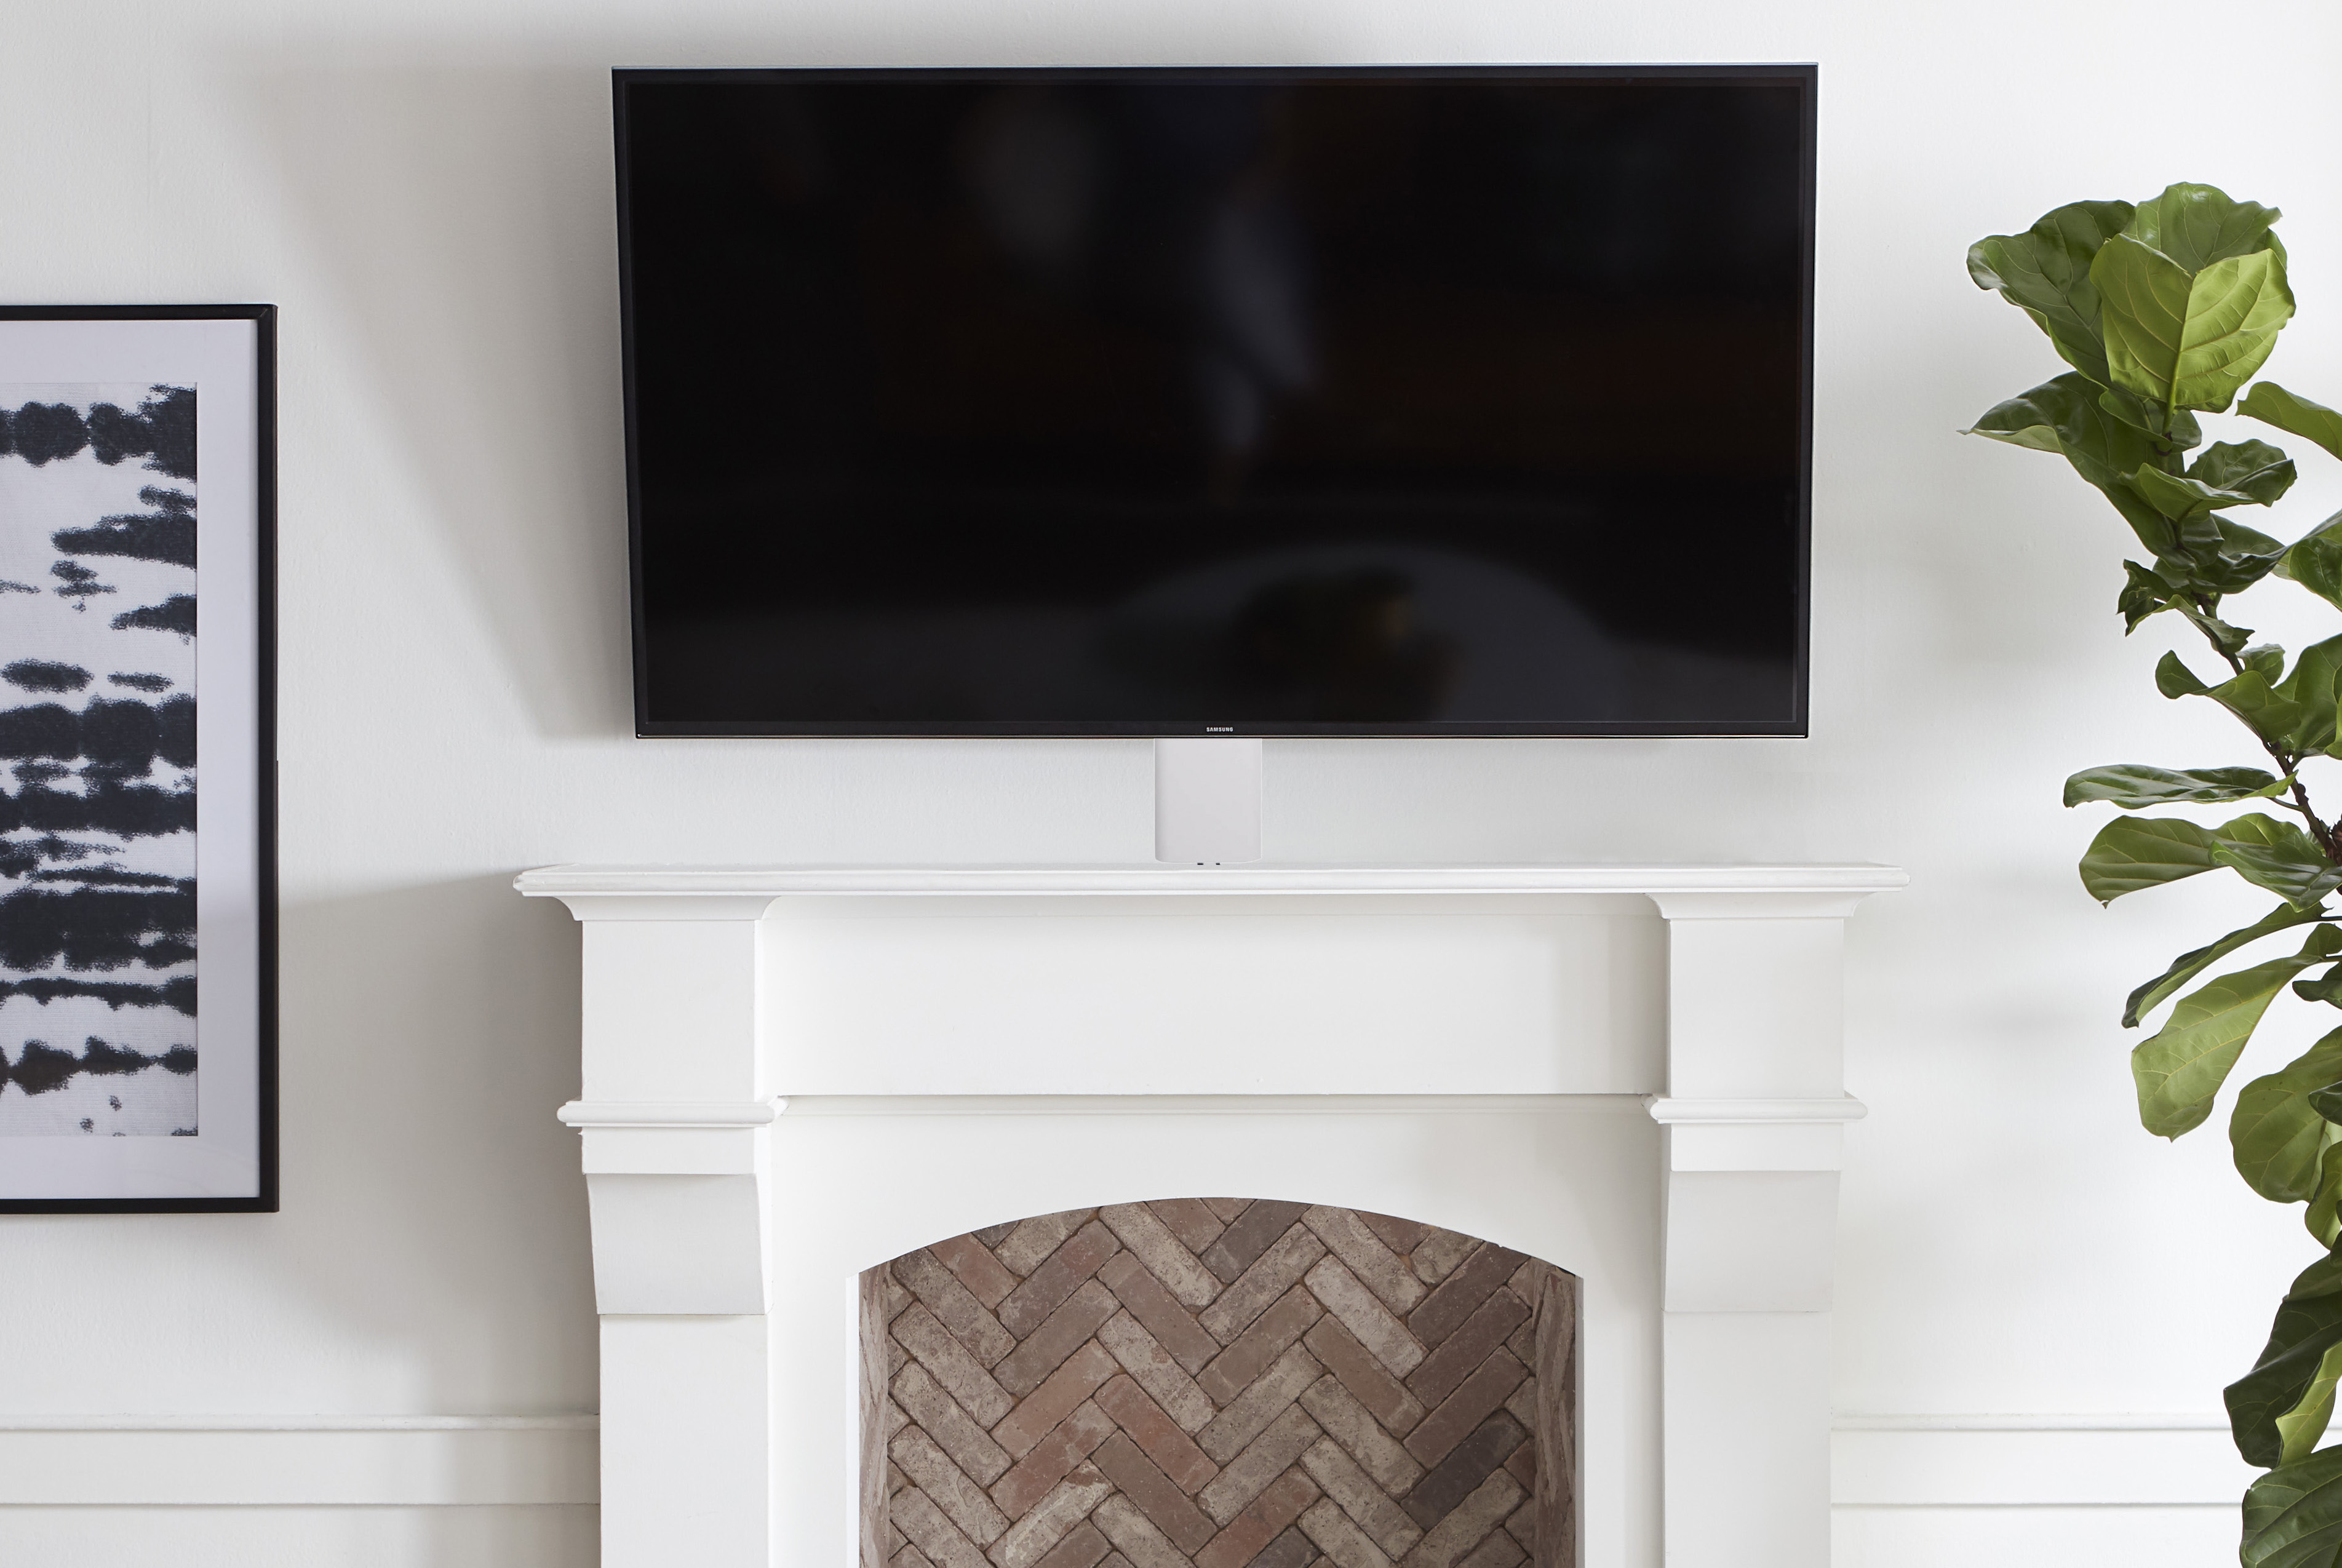 Mounting A Tv Over Fireplace How, How To Mount Flat Screen Above Fireplace